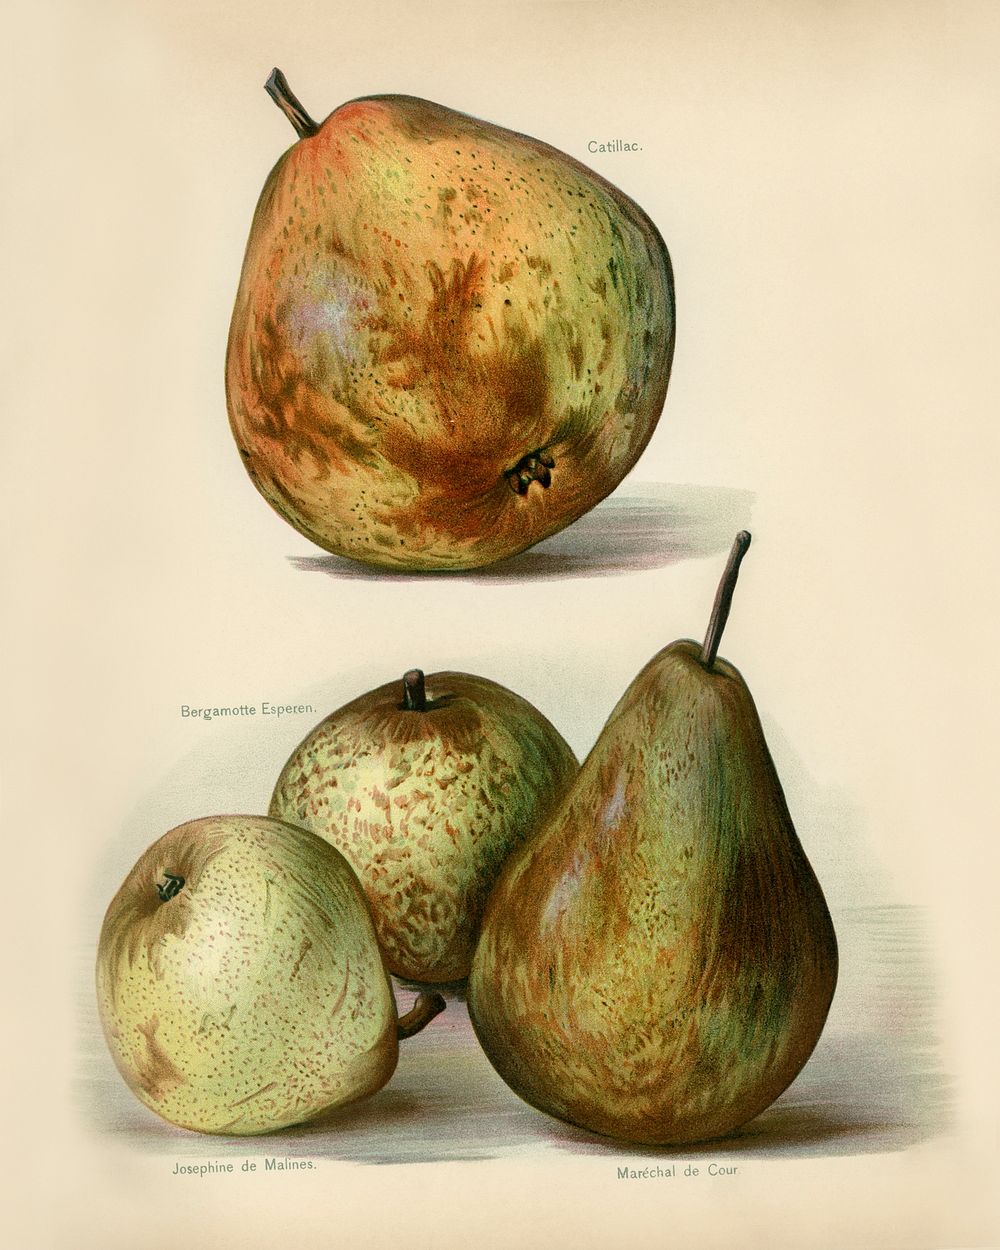 Vintage illustration of fruit digitally enhanced from our own vintage edition of The Fruit Grower's Guide (1891) by John…